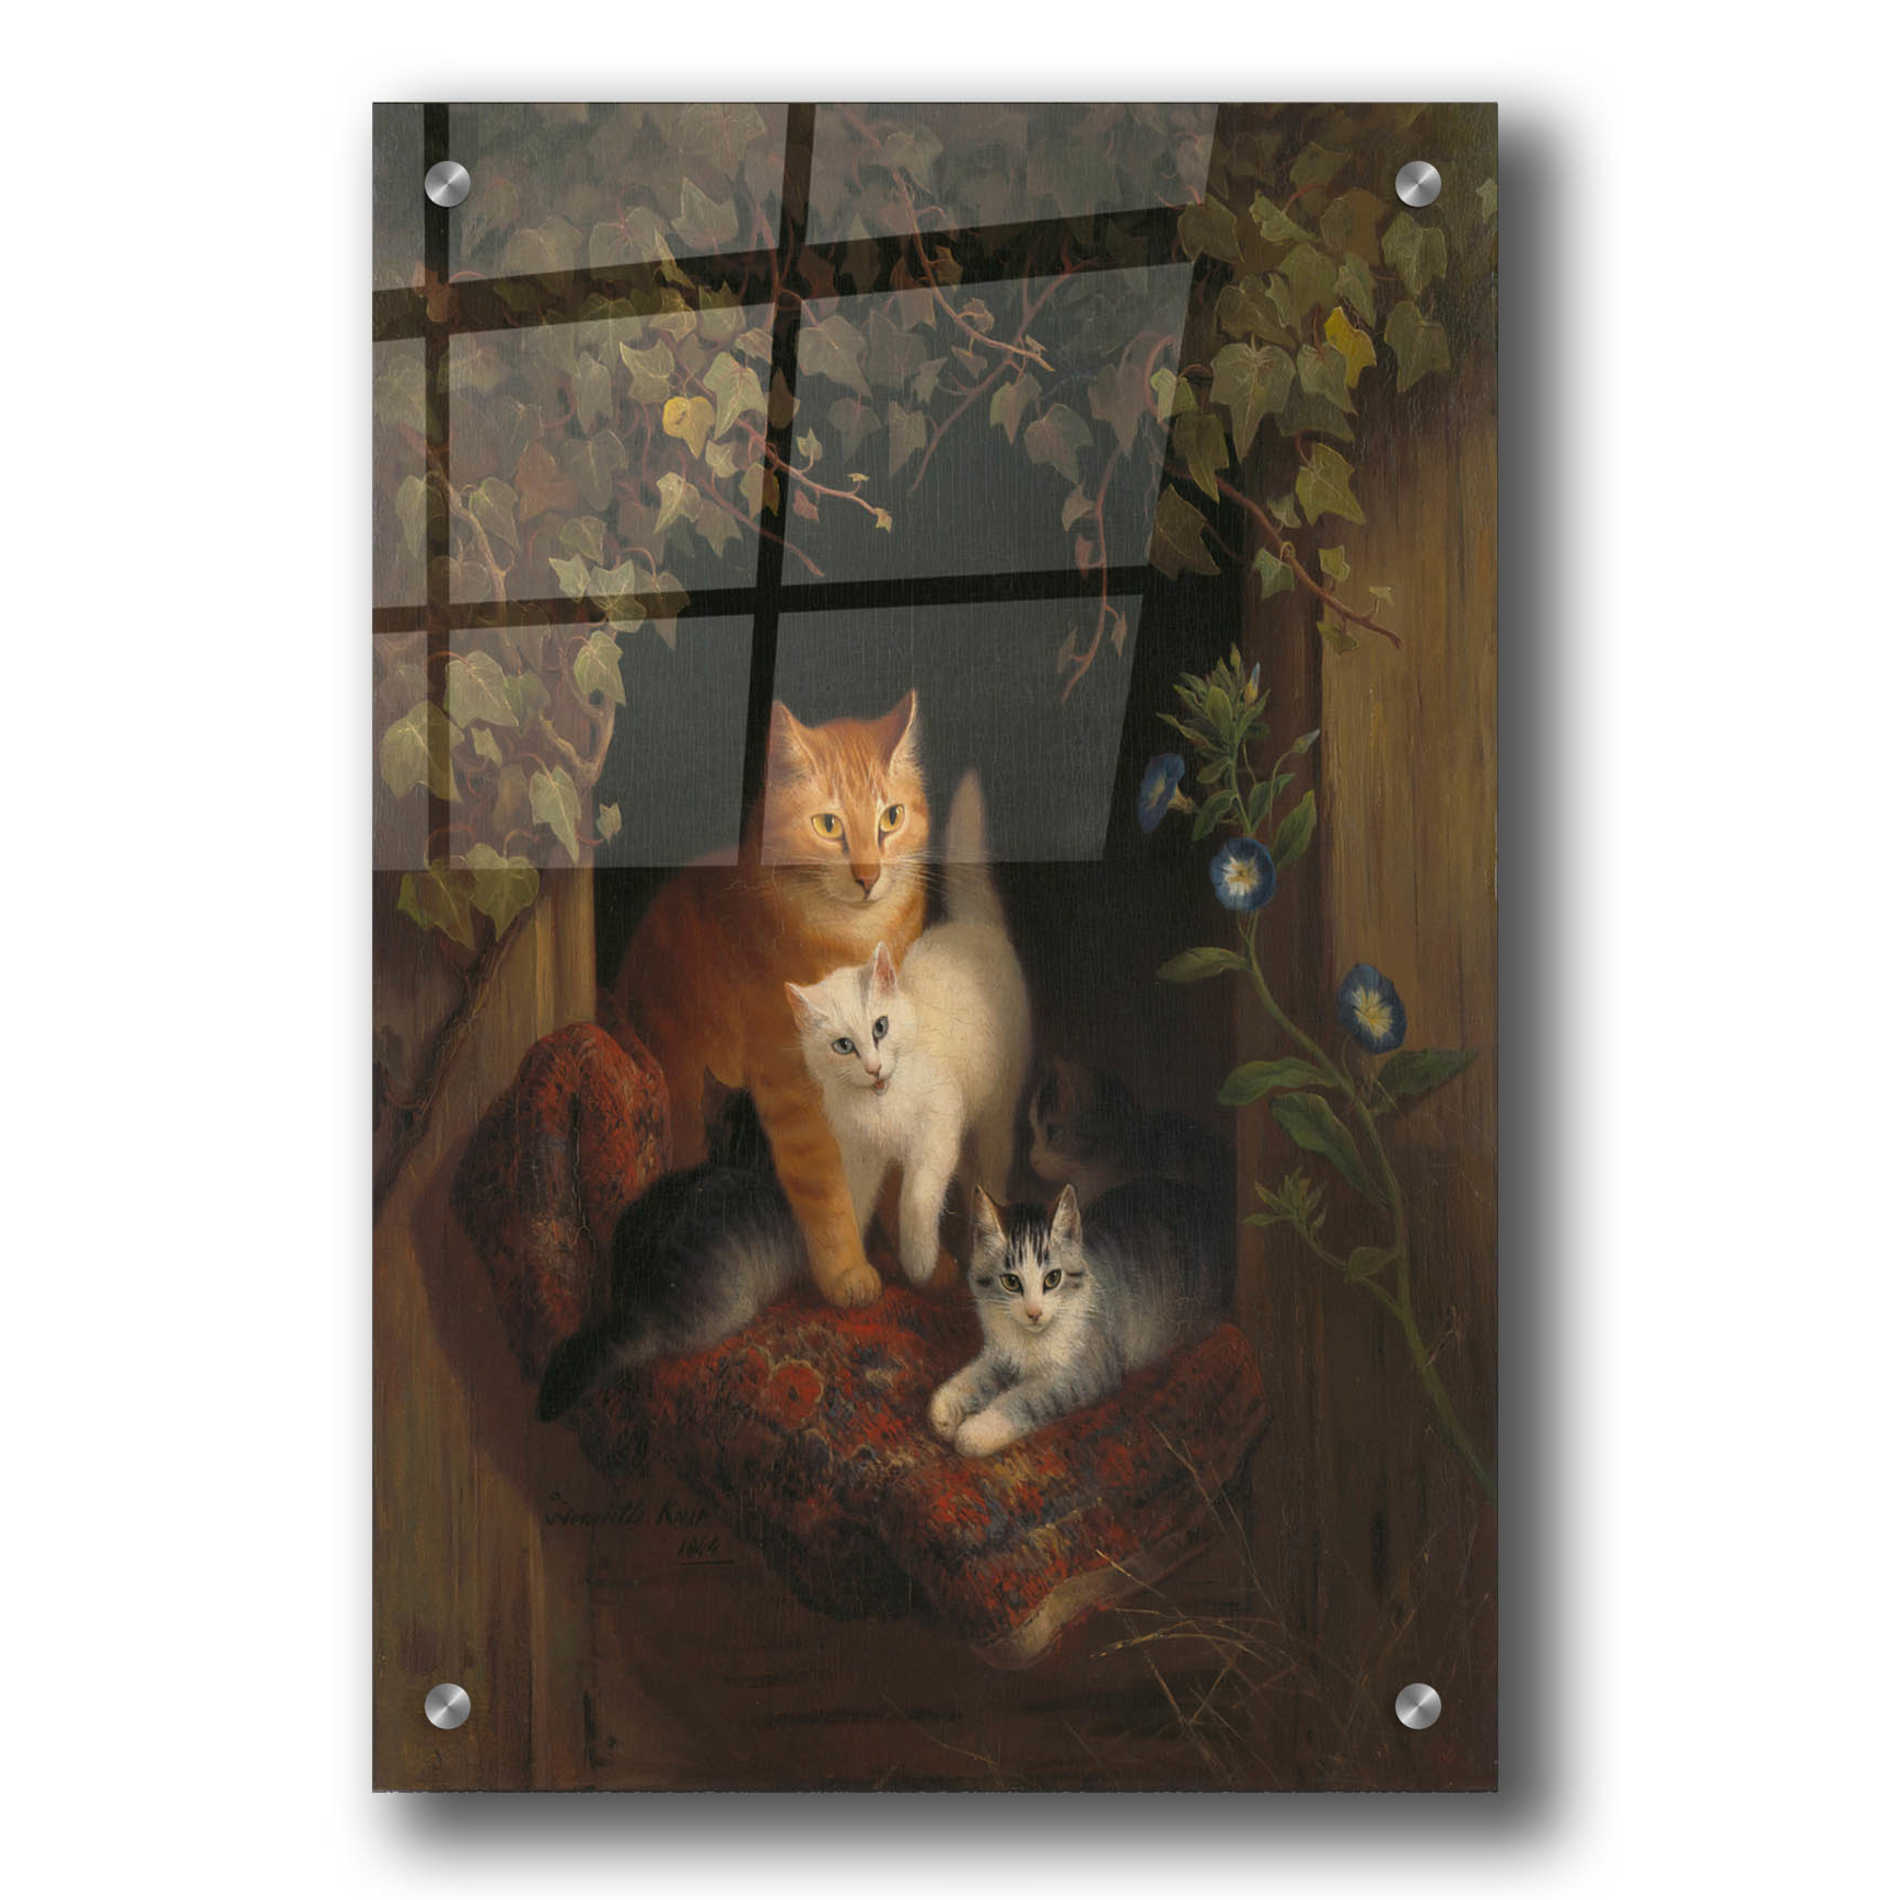 Epic Art 'Cat with Kittens' by Henriette Ronner-Knip, Acrylic Glass Wall Art,24x36